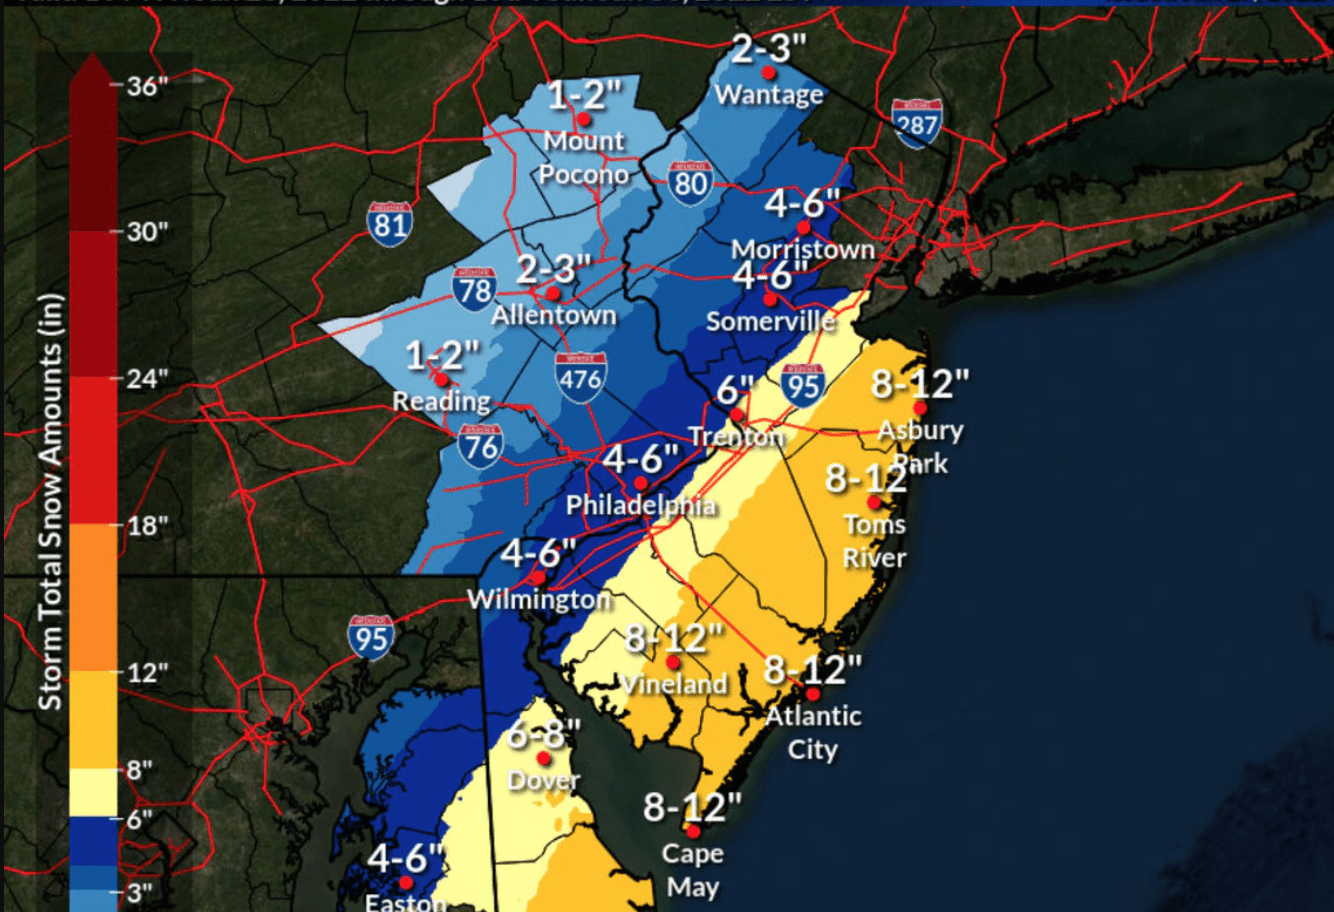 New Jersey Snow Total Update - Jan 28th